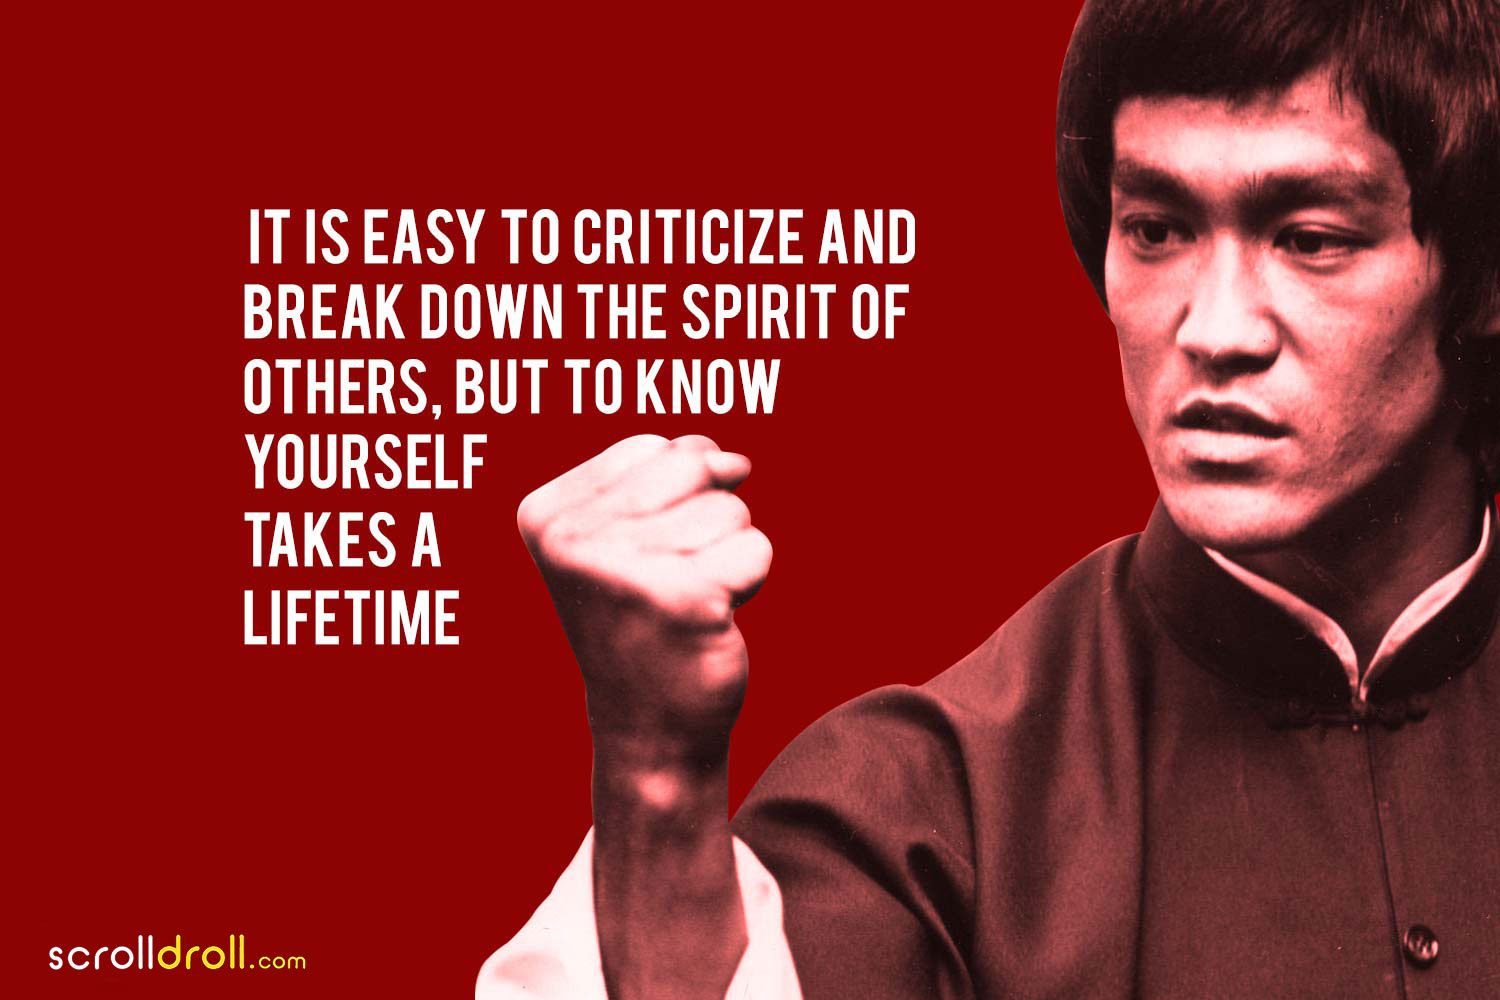 bruce lee quotes 6 - The Best of Indian Pop Culture & What's ...